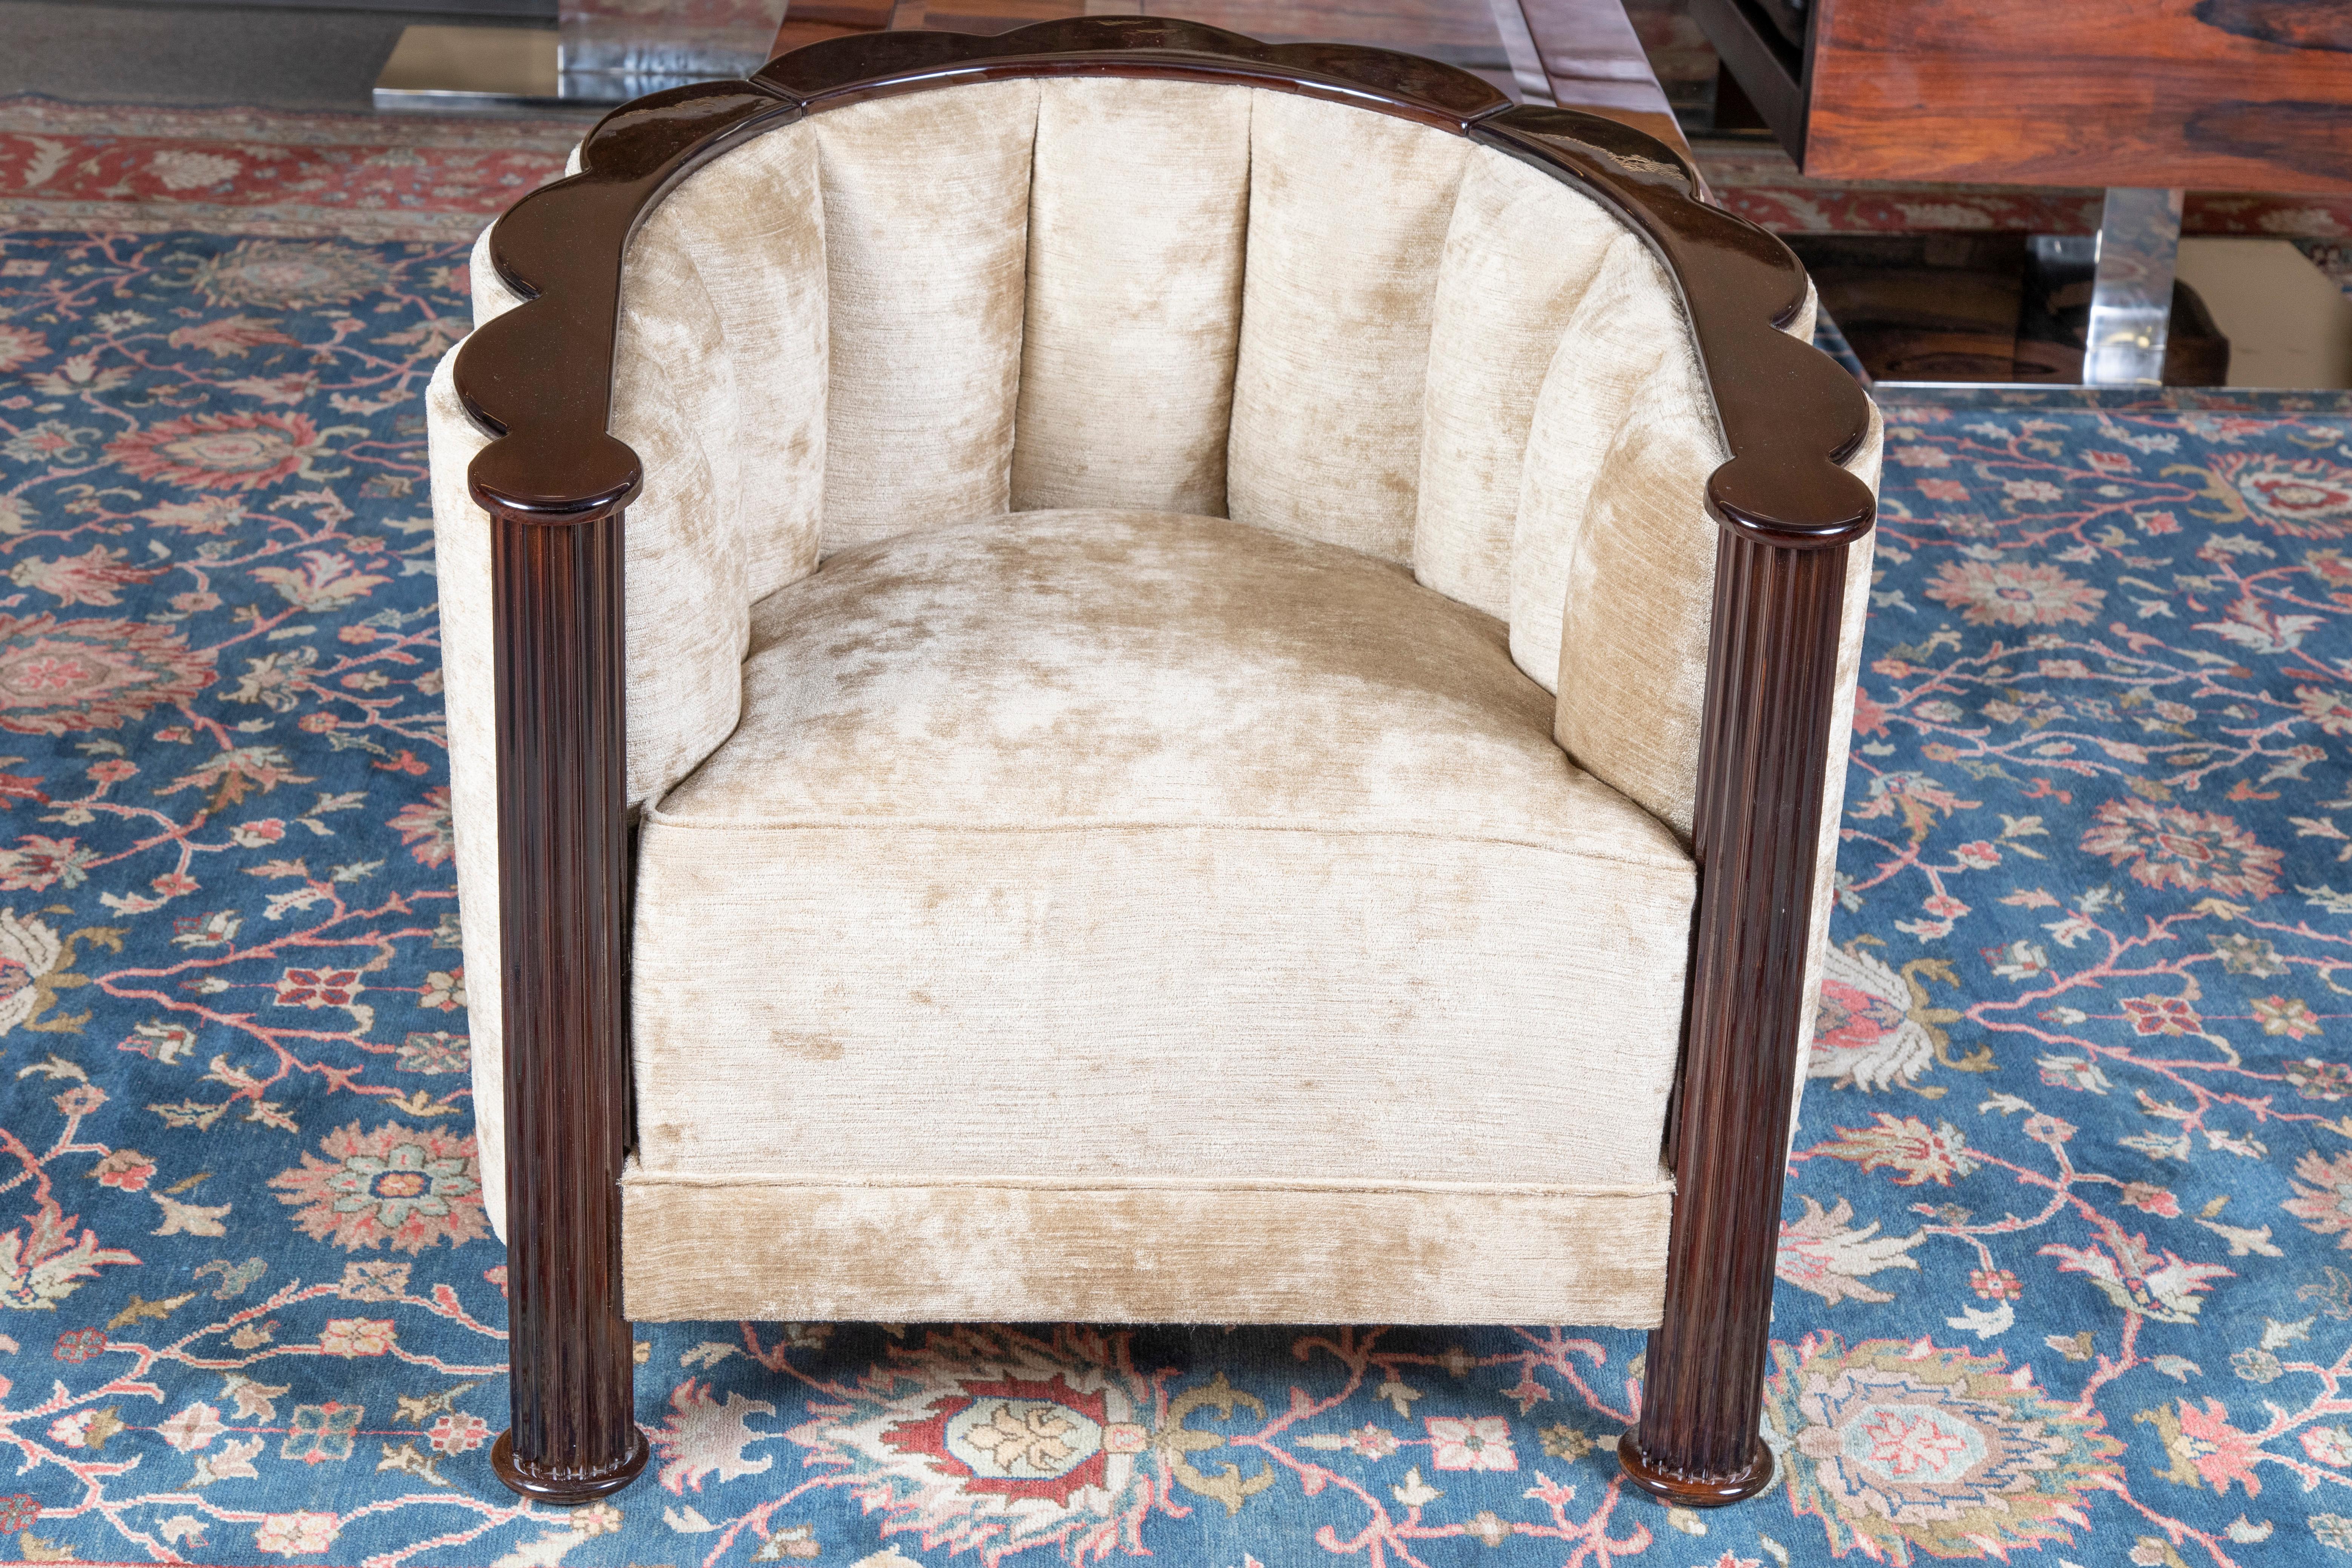 Chair is  made out of fine walnut wood.
Re-upholstered with light beige velvety fabric.
Back of the chair is built in semi-circular shape. On the top of back support there is dark wood trimming 
Chair is elevated by 4 small rectangular wooden legs.